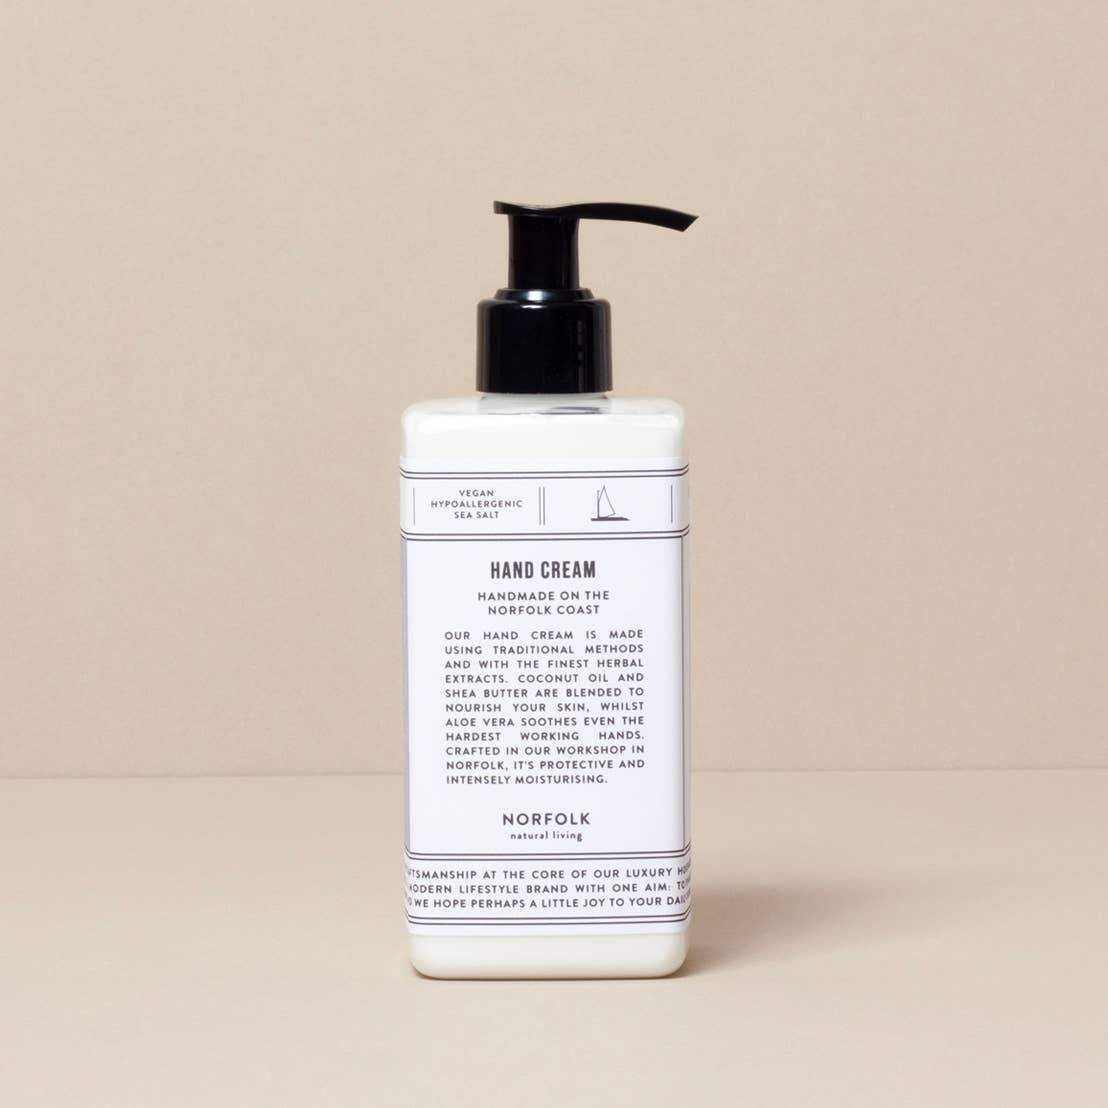 A bottle of Norfolk Natural Living Coastal Hand Lotion with a pump dispenser on a beige background. The label includes text describing the product's moisturizing features and origin.